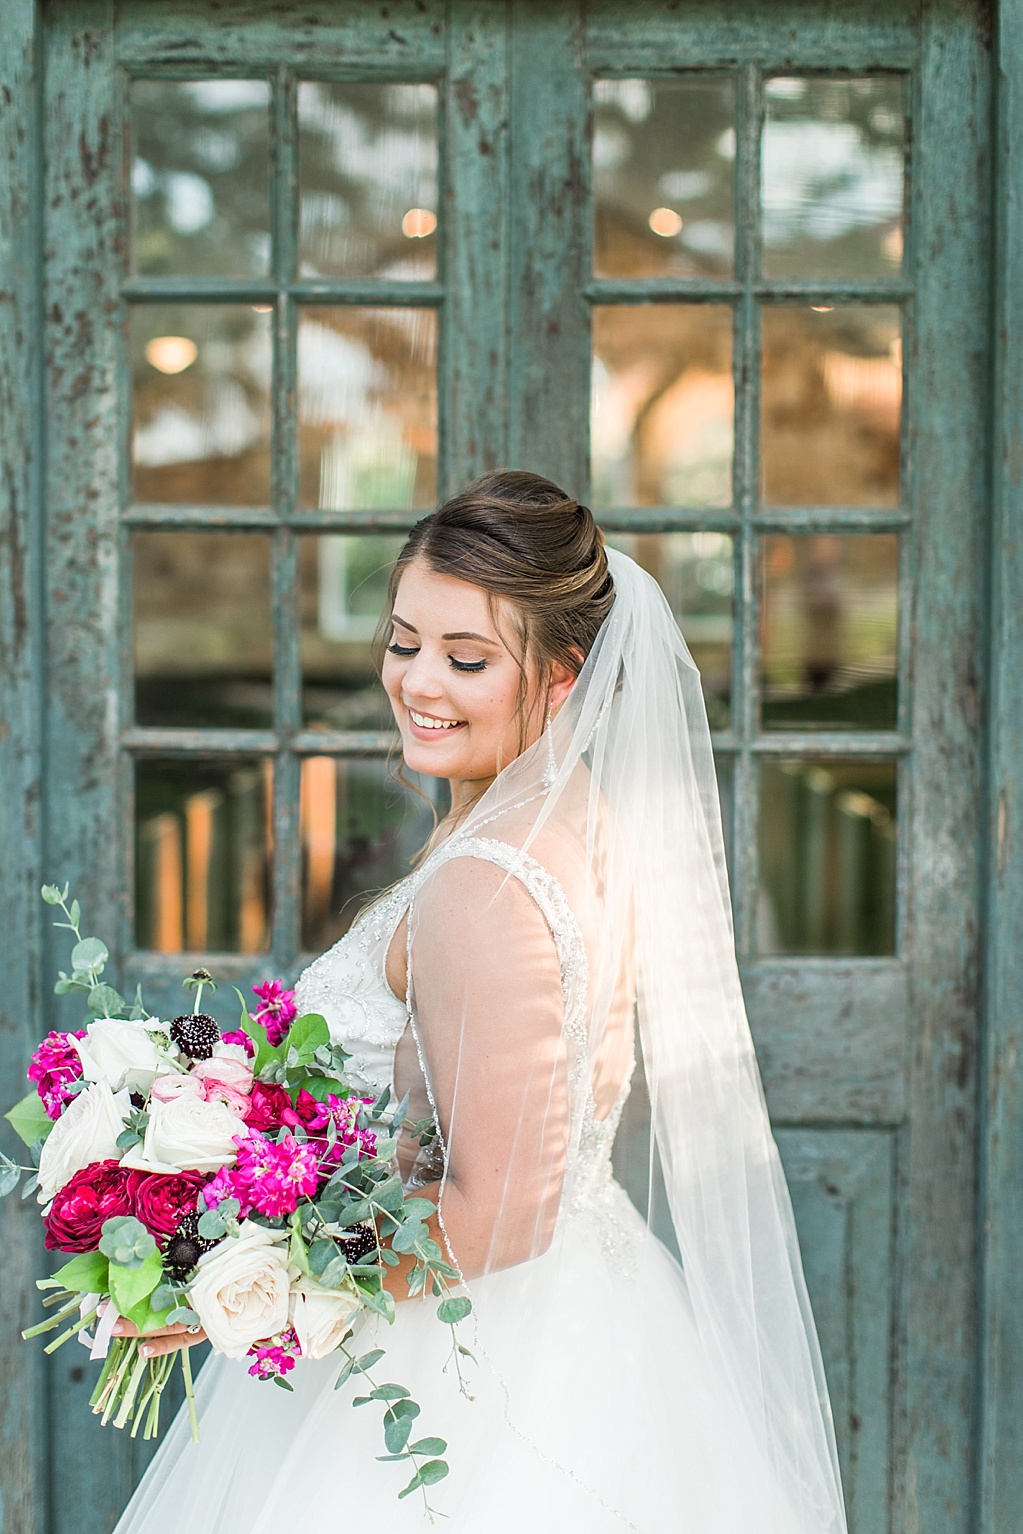 Summer Bridal Session at The Chandelier of Gruene in New Braunfels Texas 0021